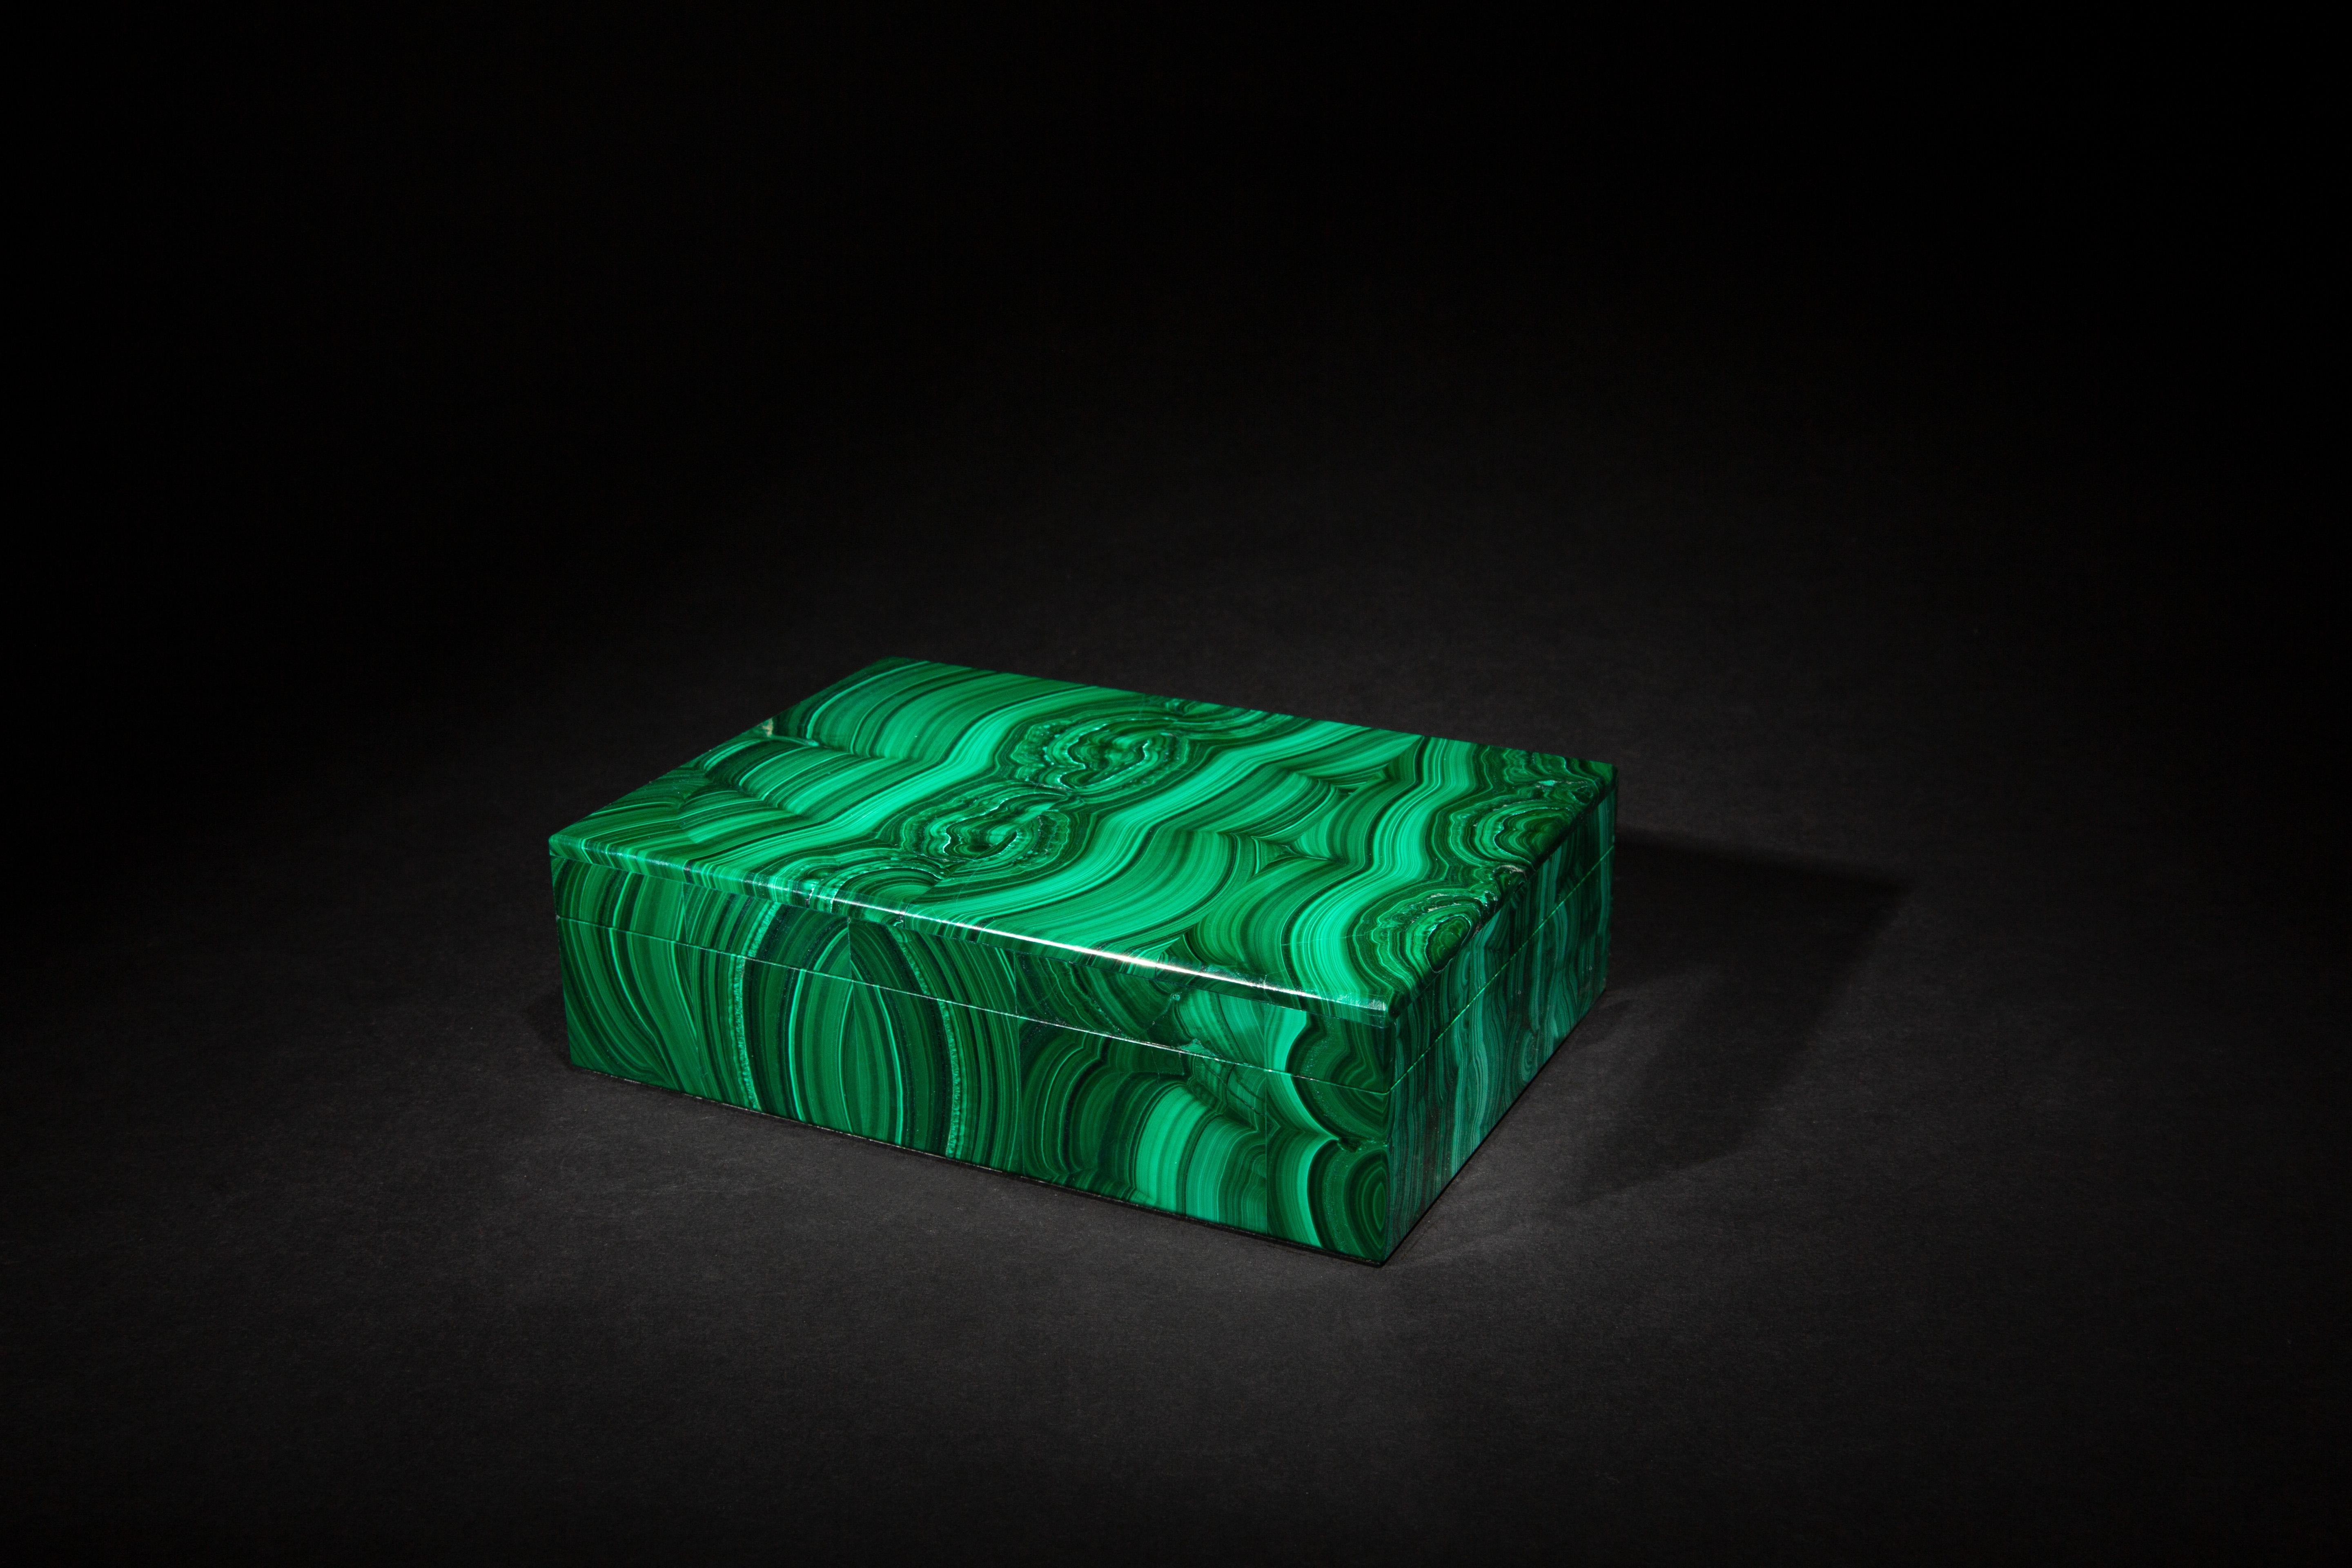 Decorative malachite box. The malachite for these boxes was sourced from the Congo, where the finest quality of this mineral is currently found. Malachite from the 18th and 19th century was also sourced from Russia. Boxes, such as this, were